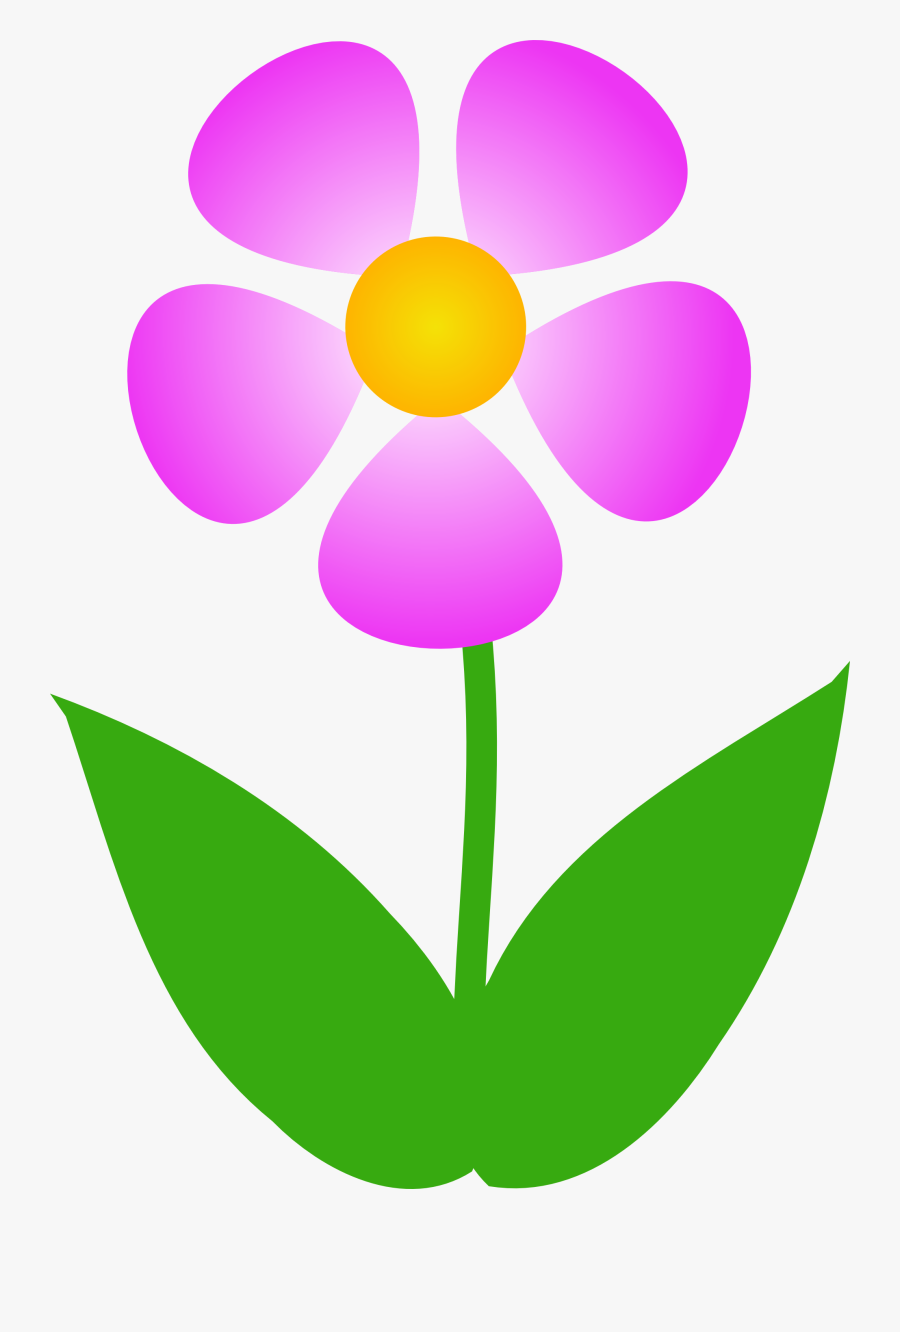 Free Clipart Images Of Flowers Flower Clip Art Pictures - Flower Clip Art Free, Transparent Clipart